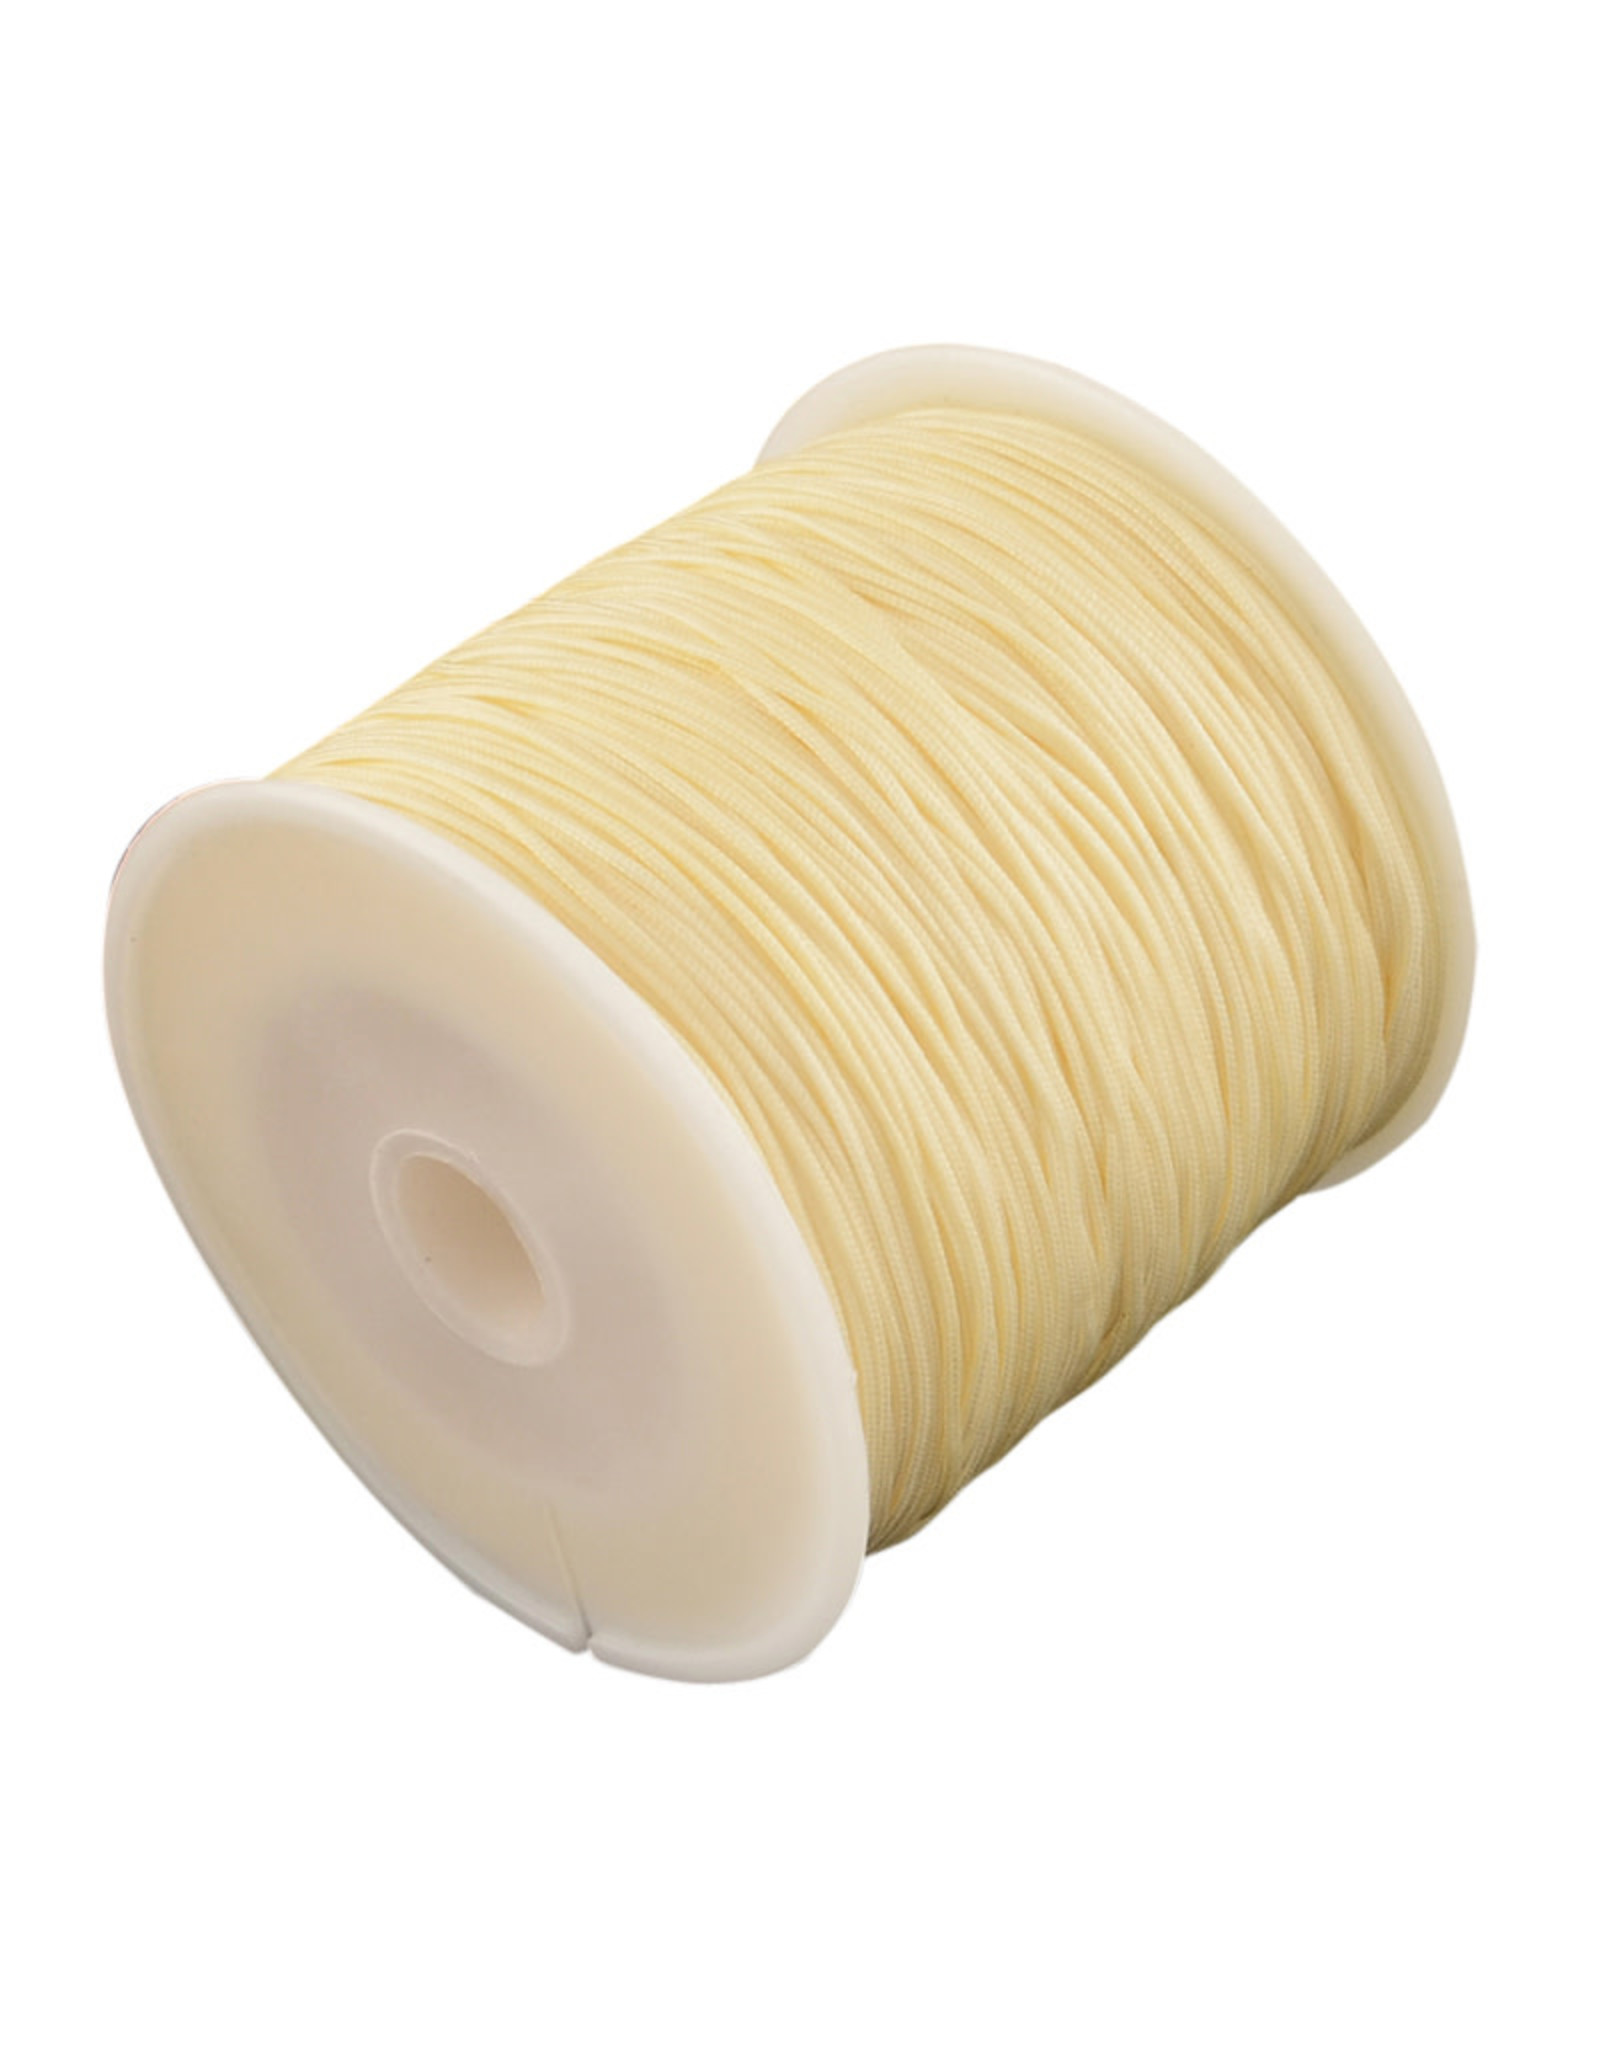 Chinese Knotting Cord .8mm Pale Lemon Yellow x100y